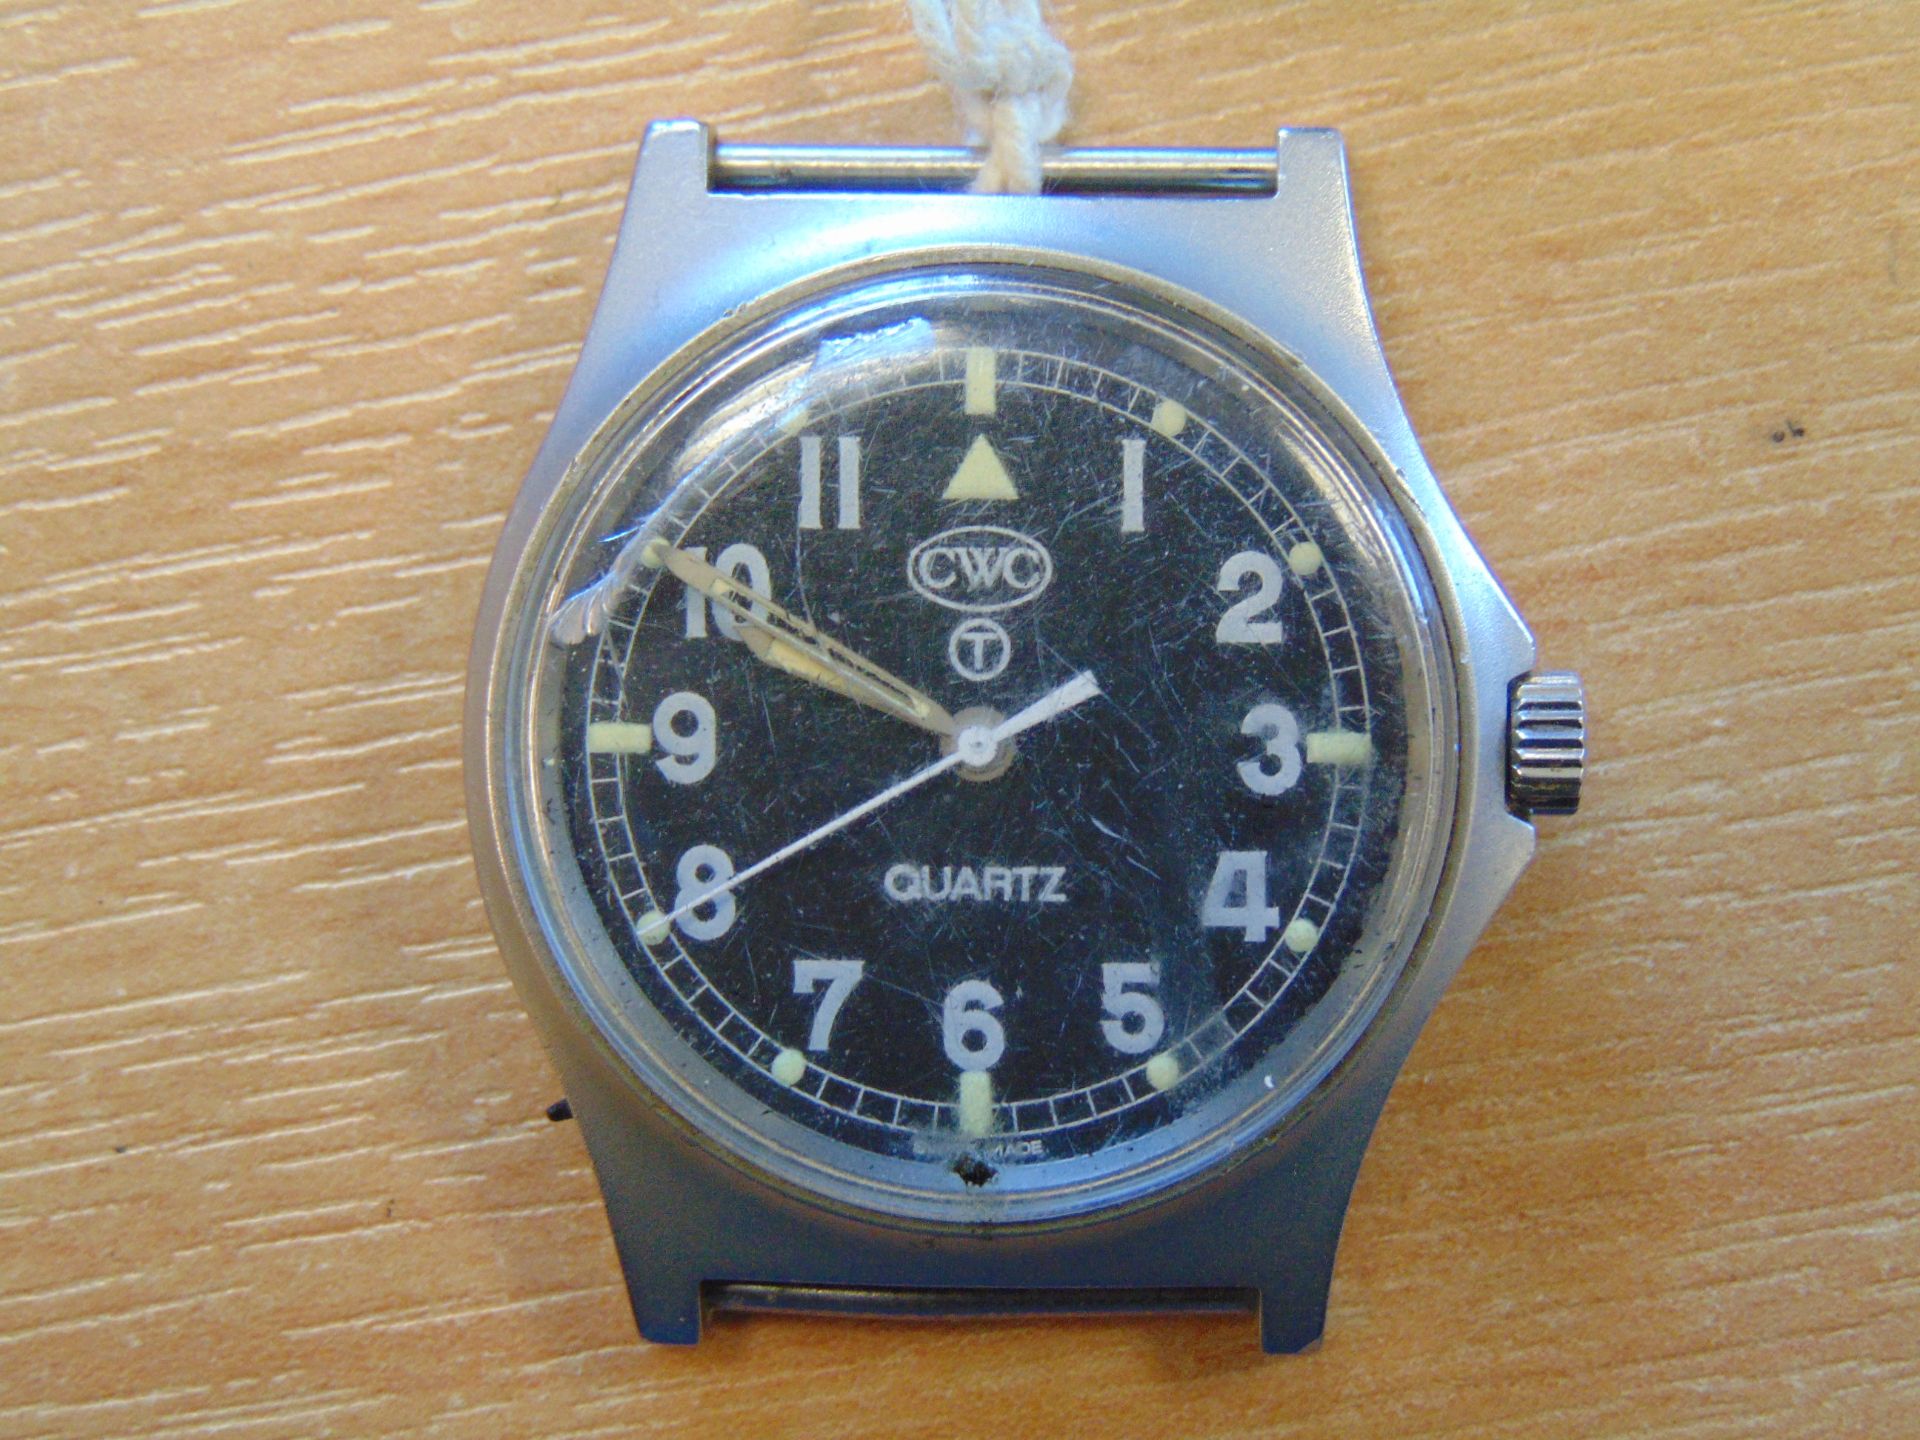 CWC 0555 RN/ MARINES ISSUE SERVICE WATCH NATO MARKS 1995 - Image 2 of 3